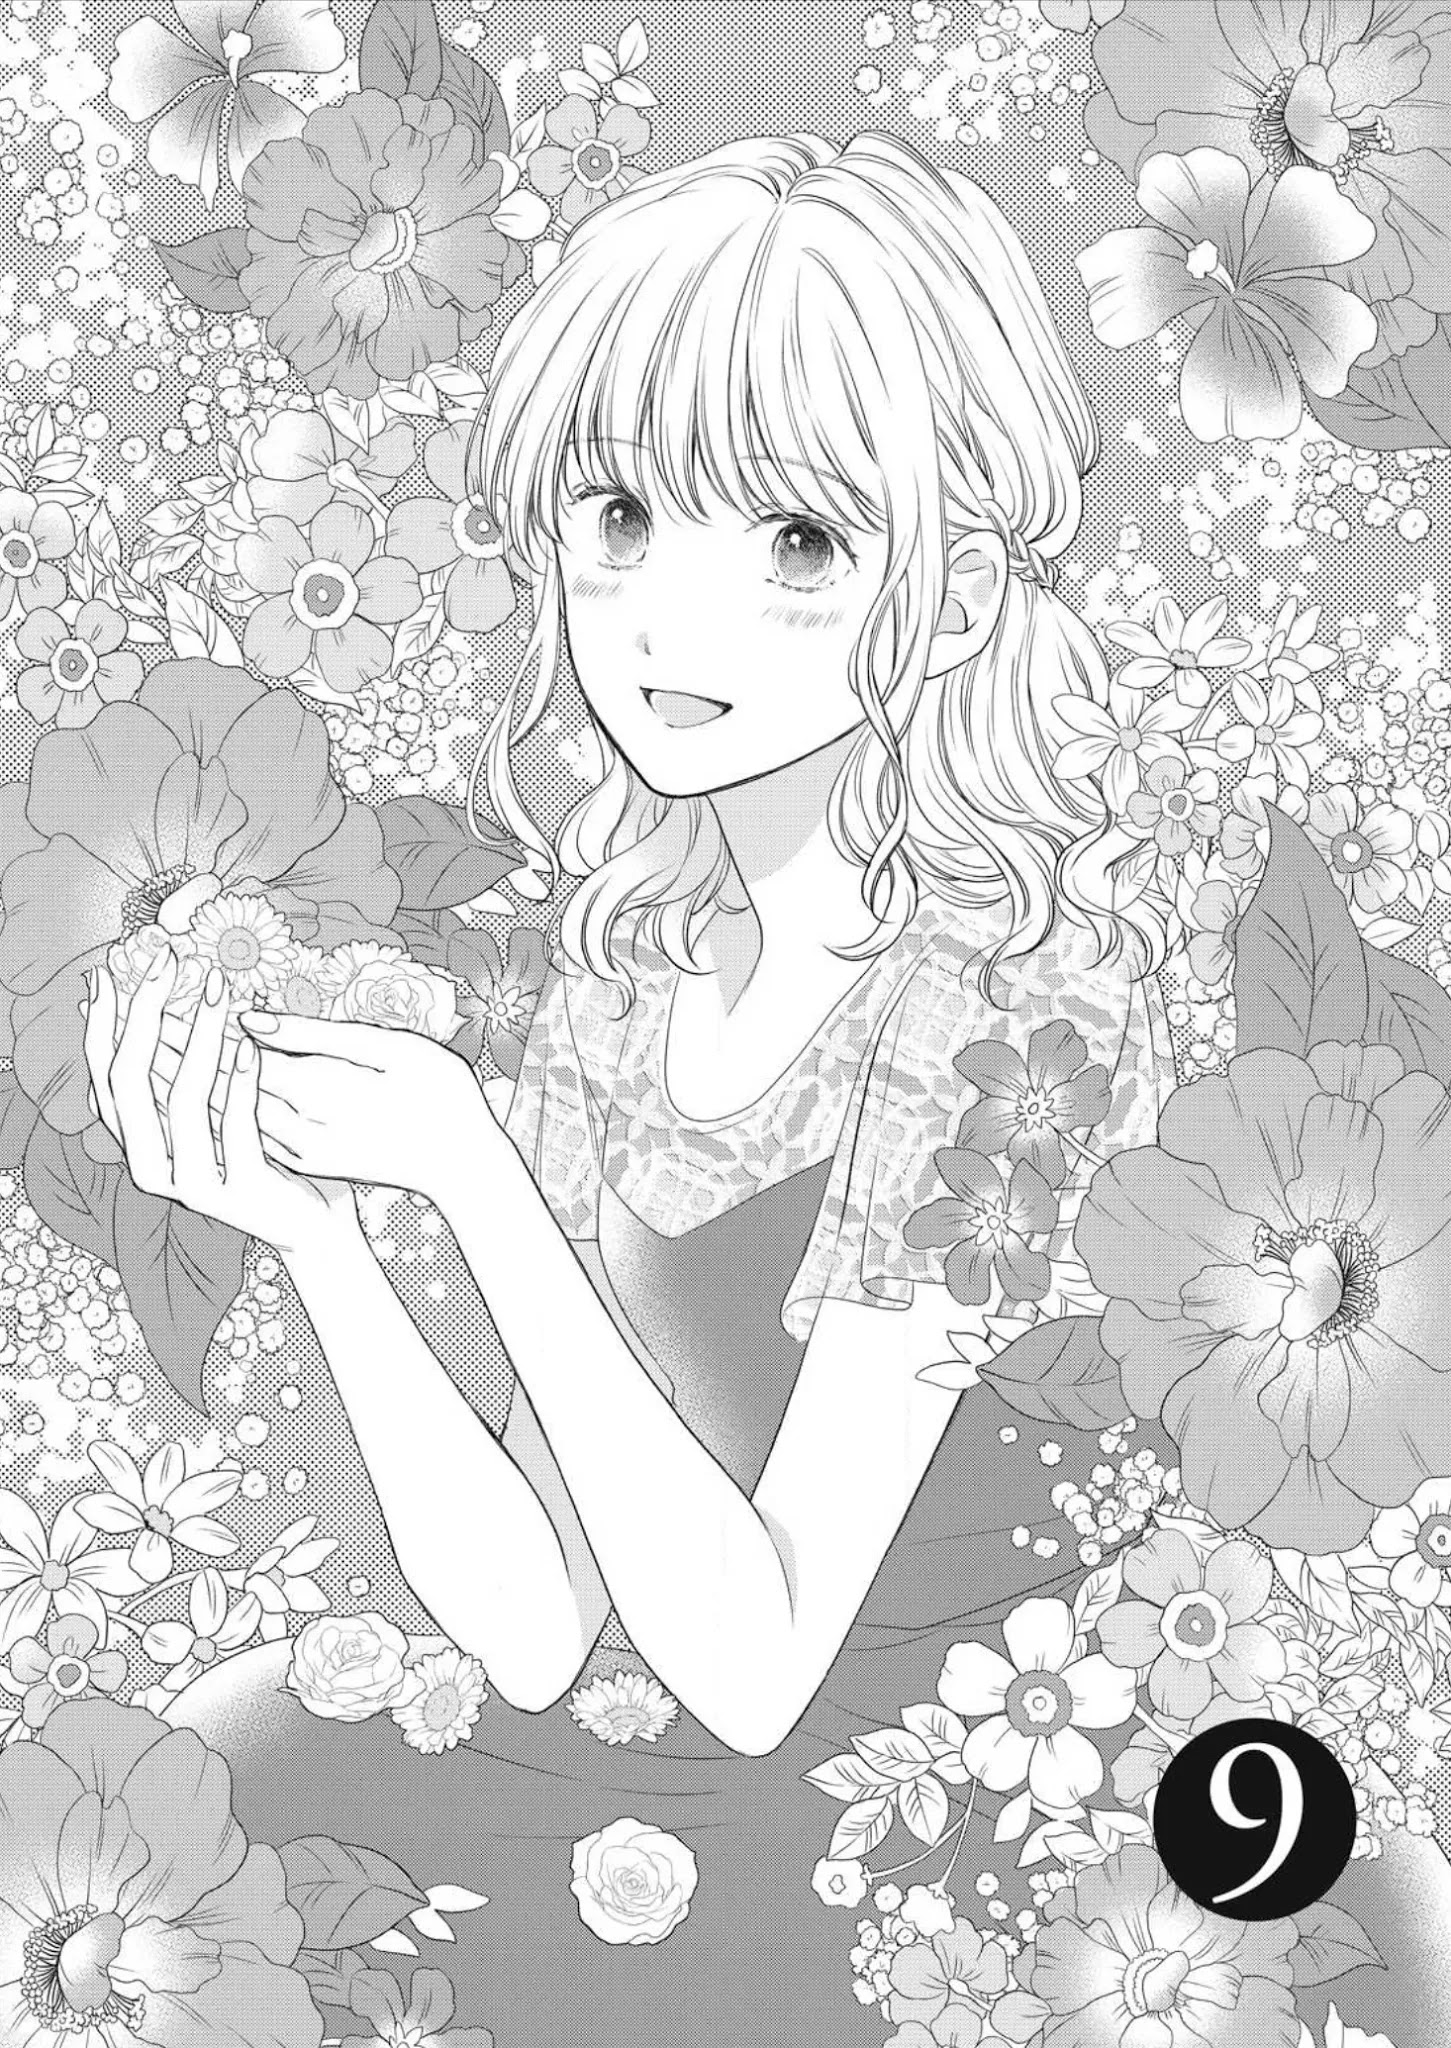 Hana Wants This Flower To Bloom! Chapter 9 #2